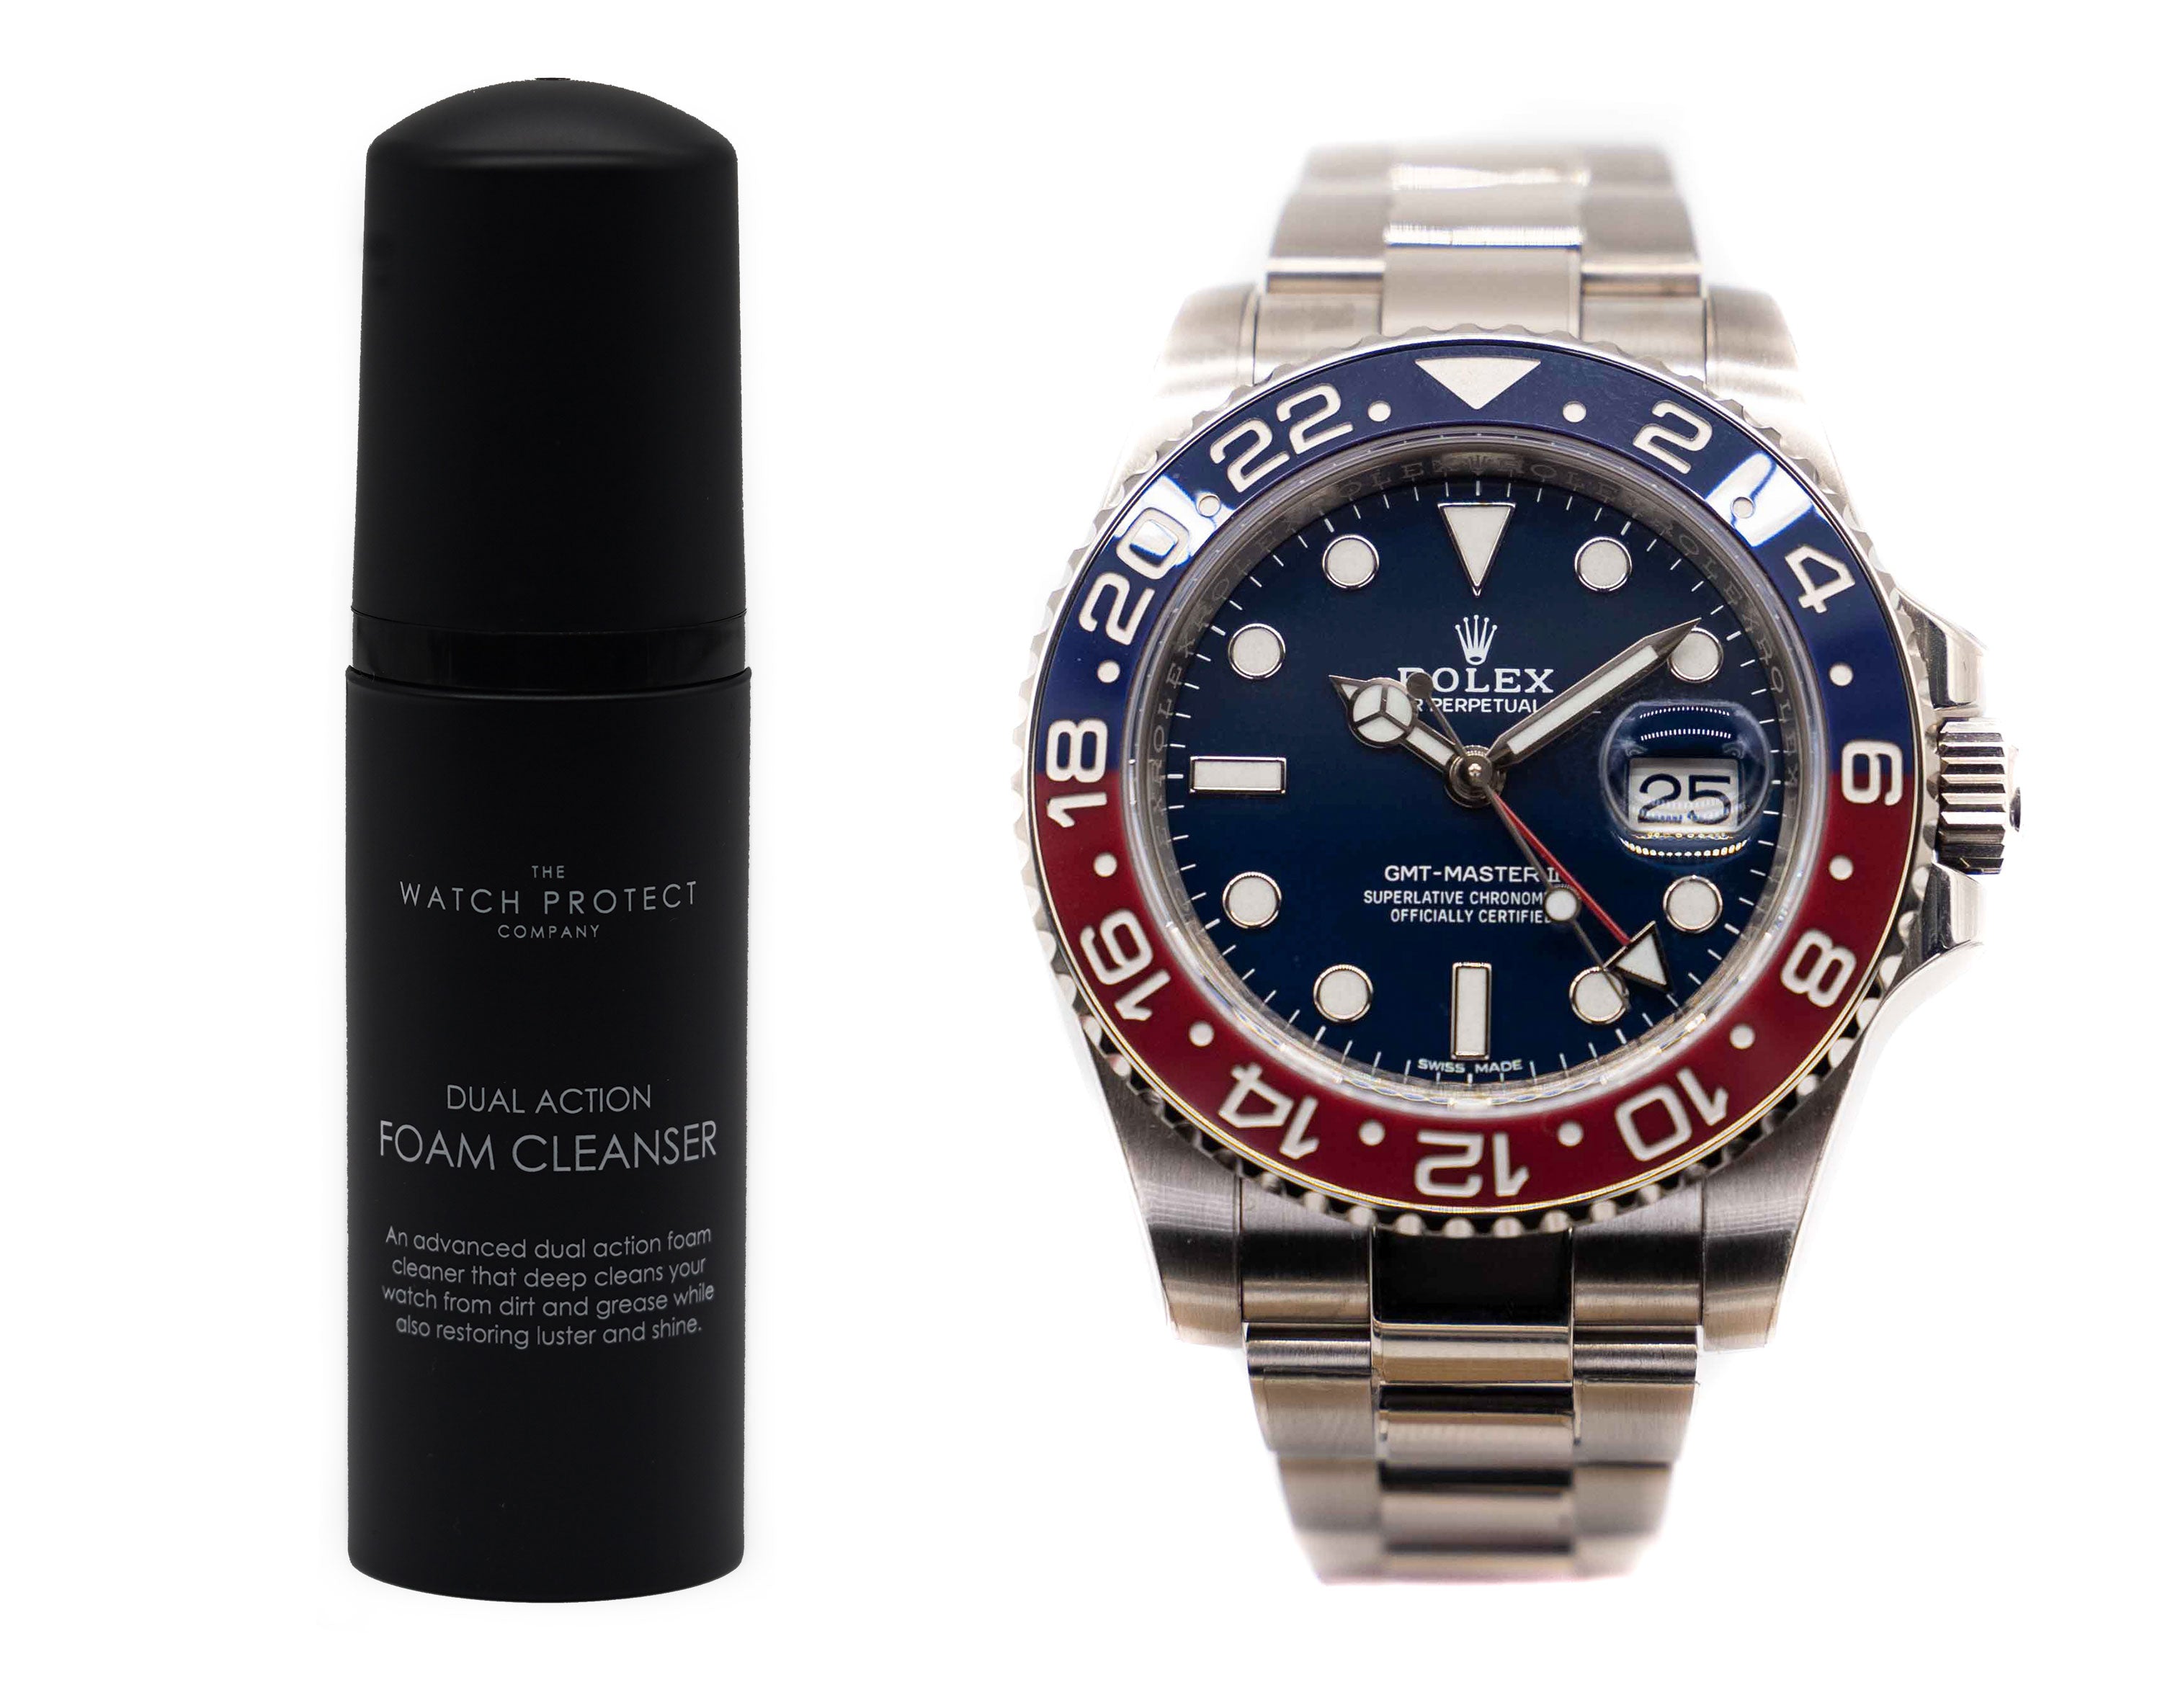 DUAL ACTION FOAM CLEANER & ROLEX GMT MASTER II 116710/126711 - TIER 3 - WATCH PROTECTION KIT BUNDLE